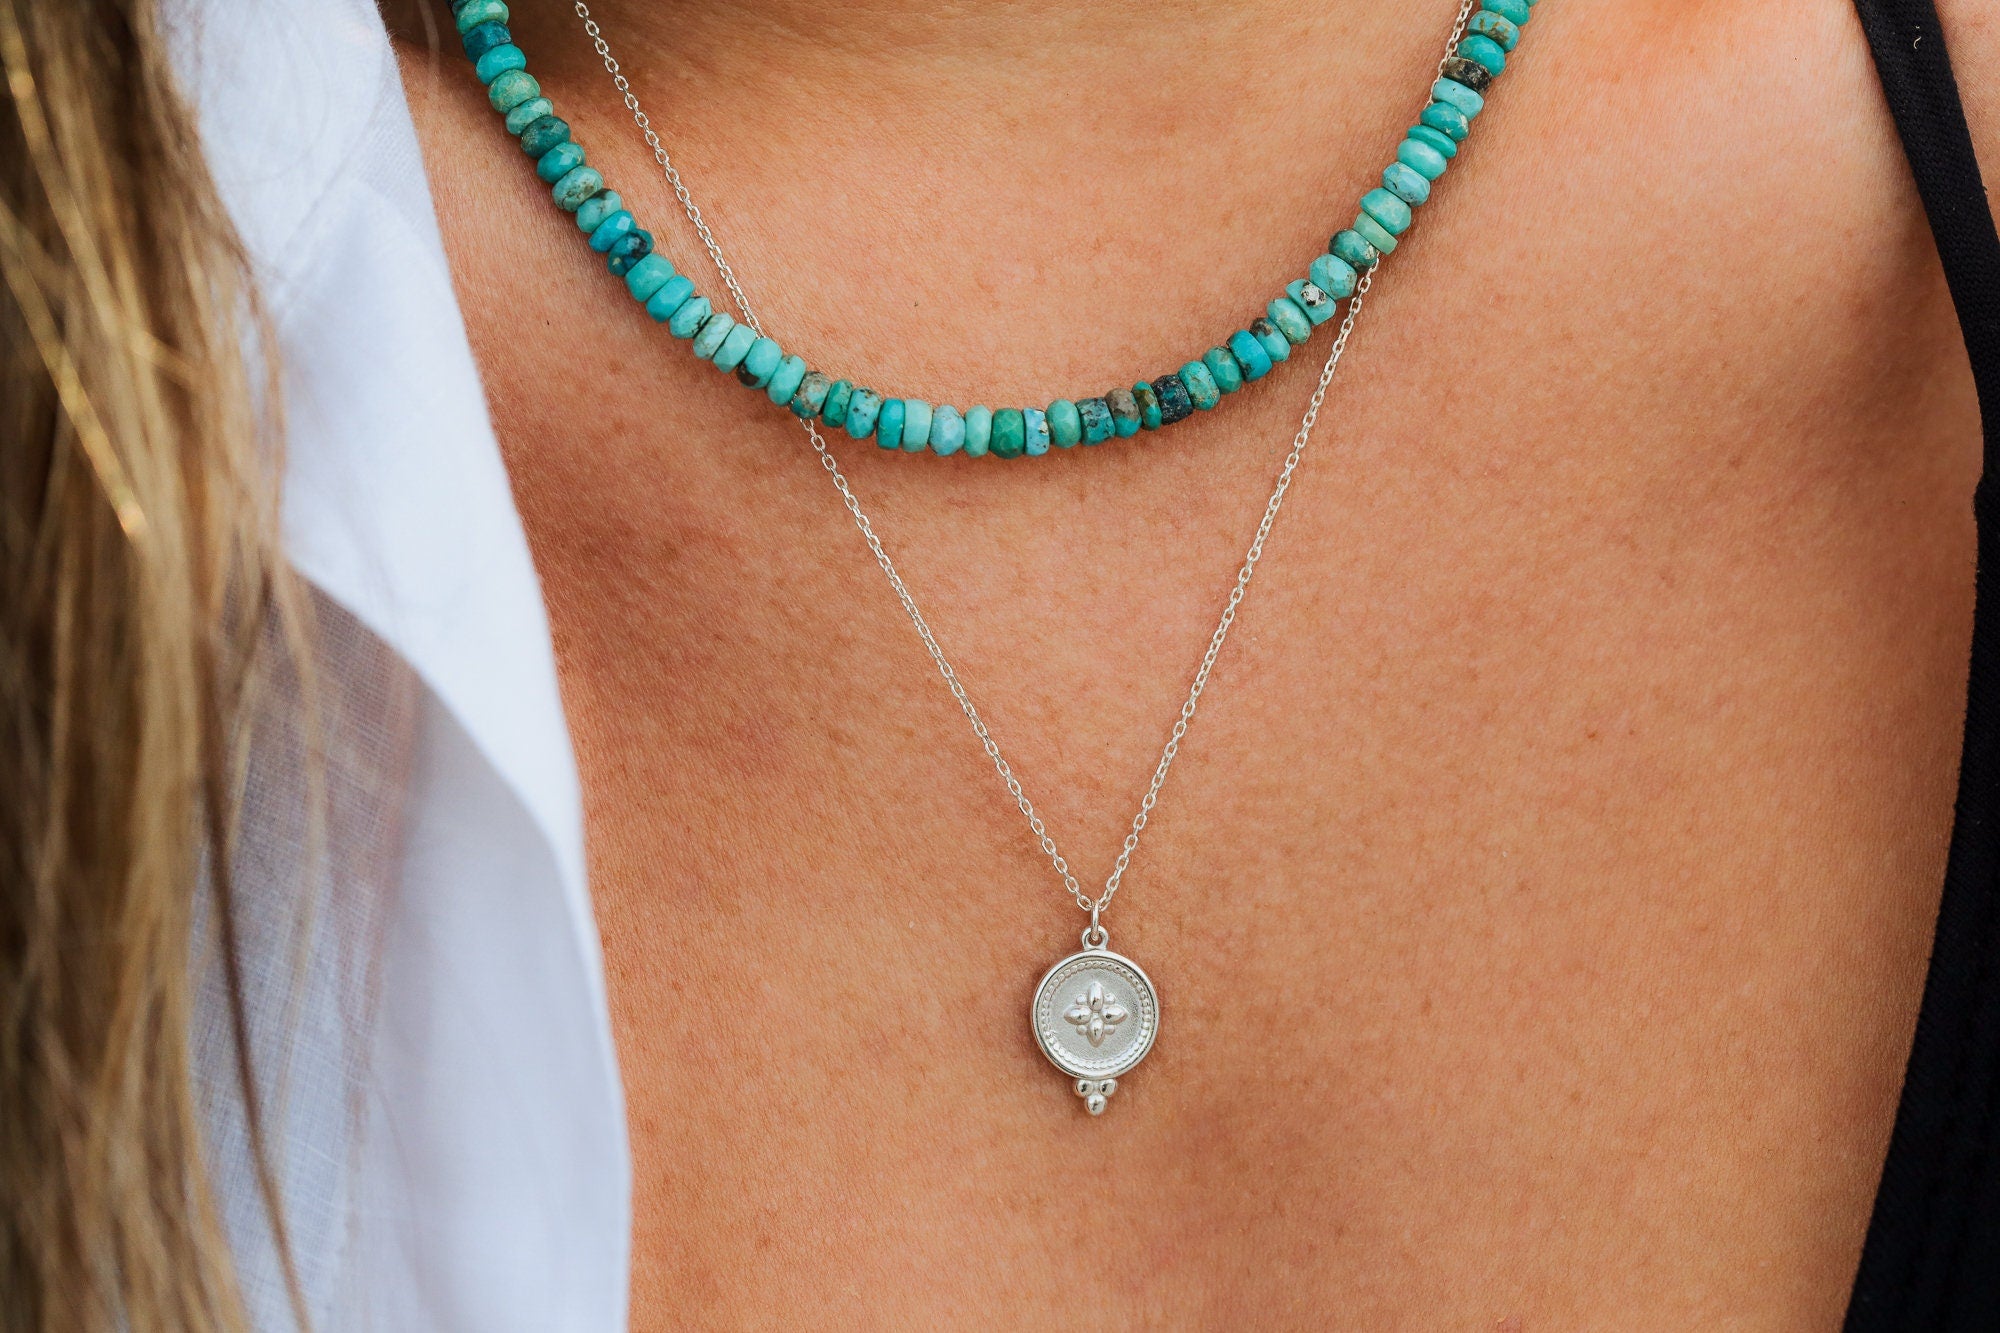 Silver medallion necklace